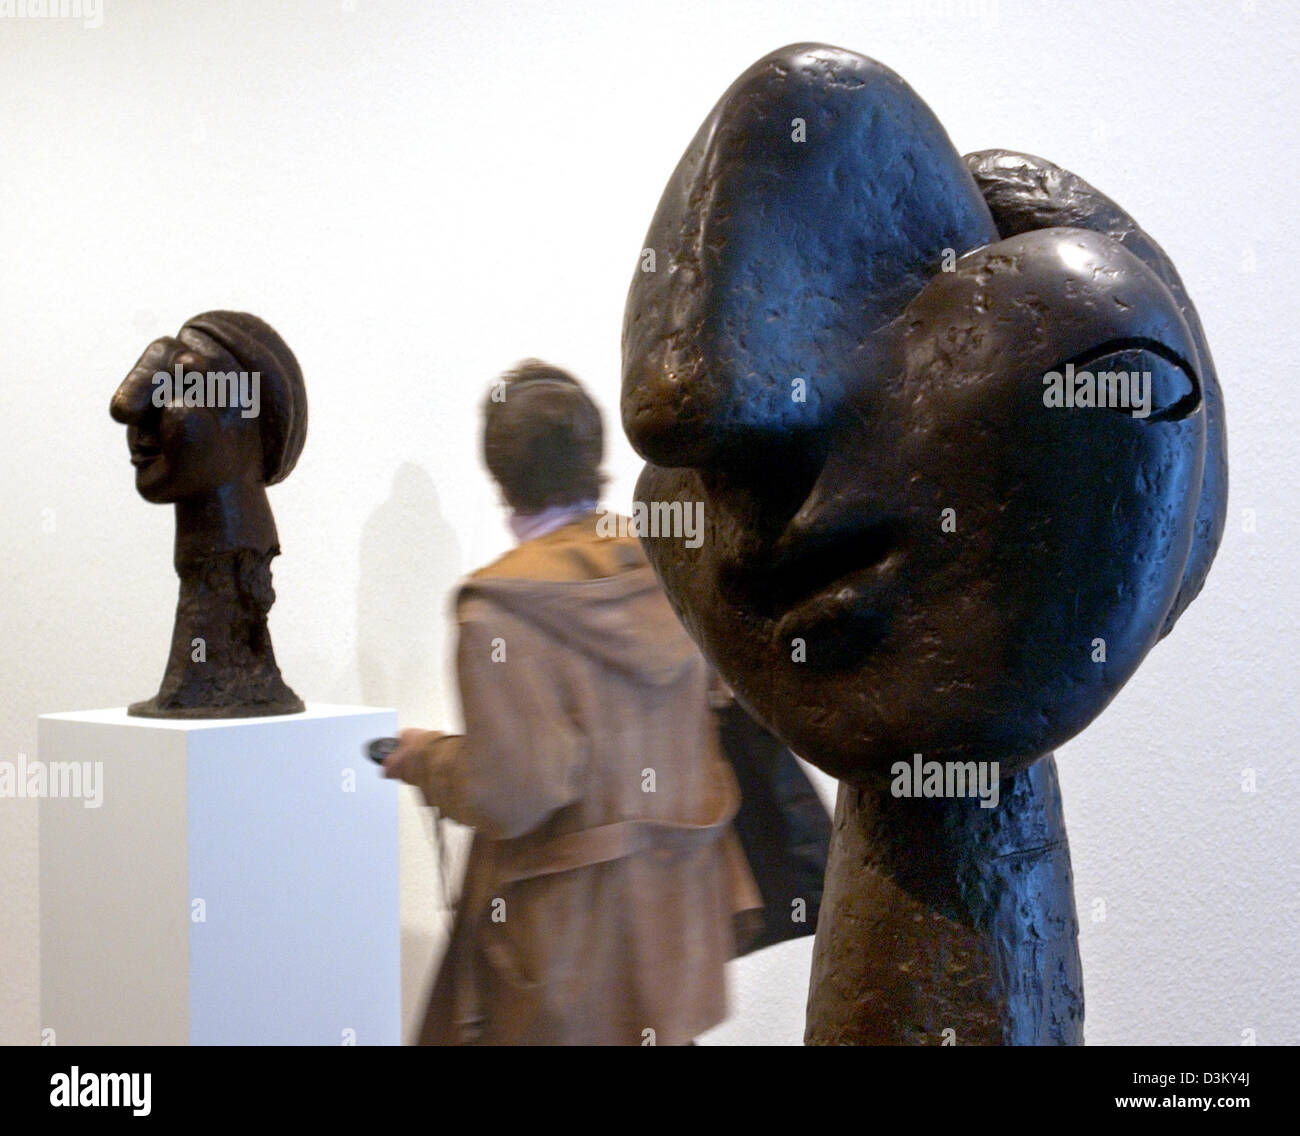 dpa) - A visitor passes sculptures of the Spanish artist Pablo